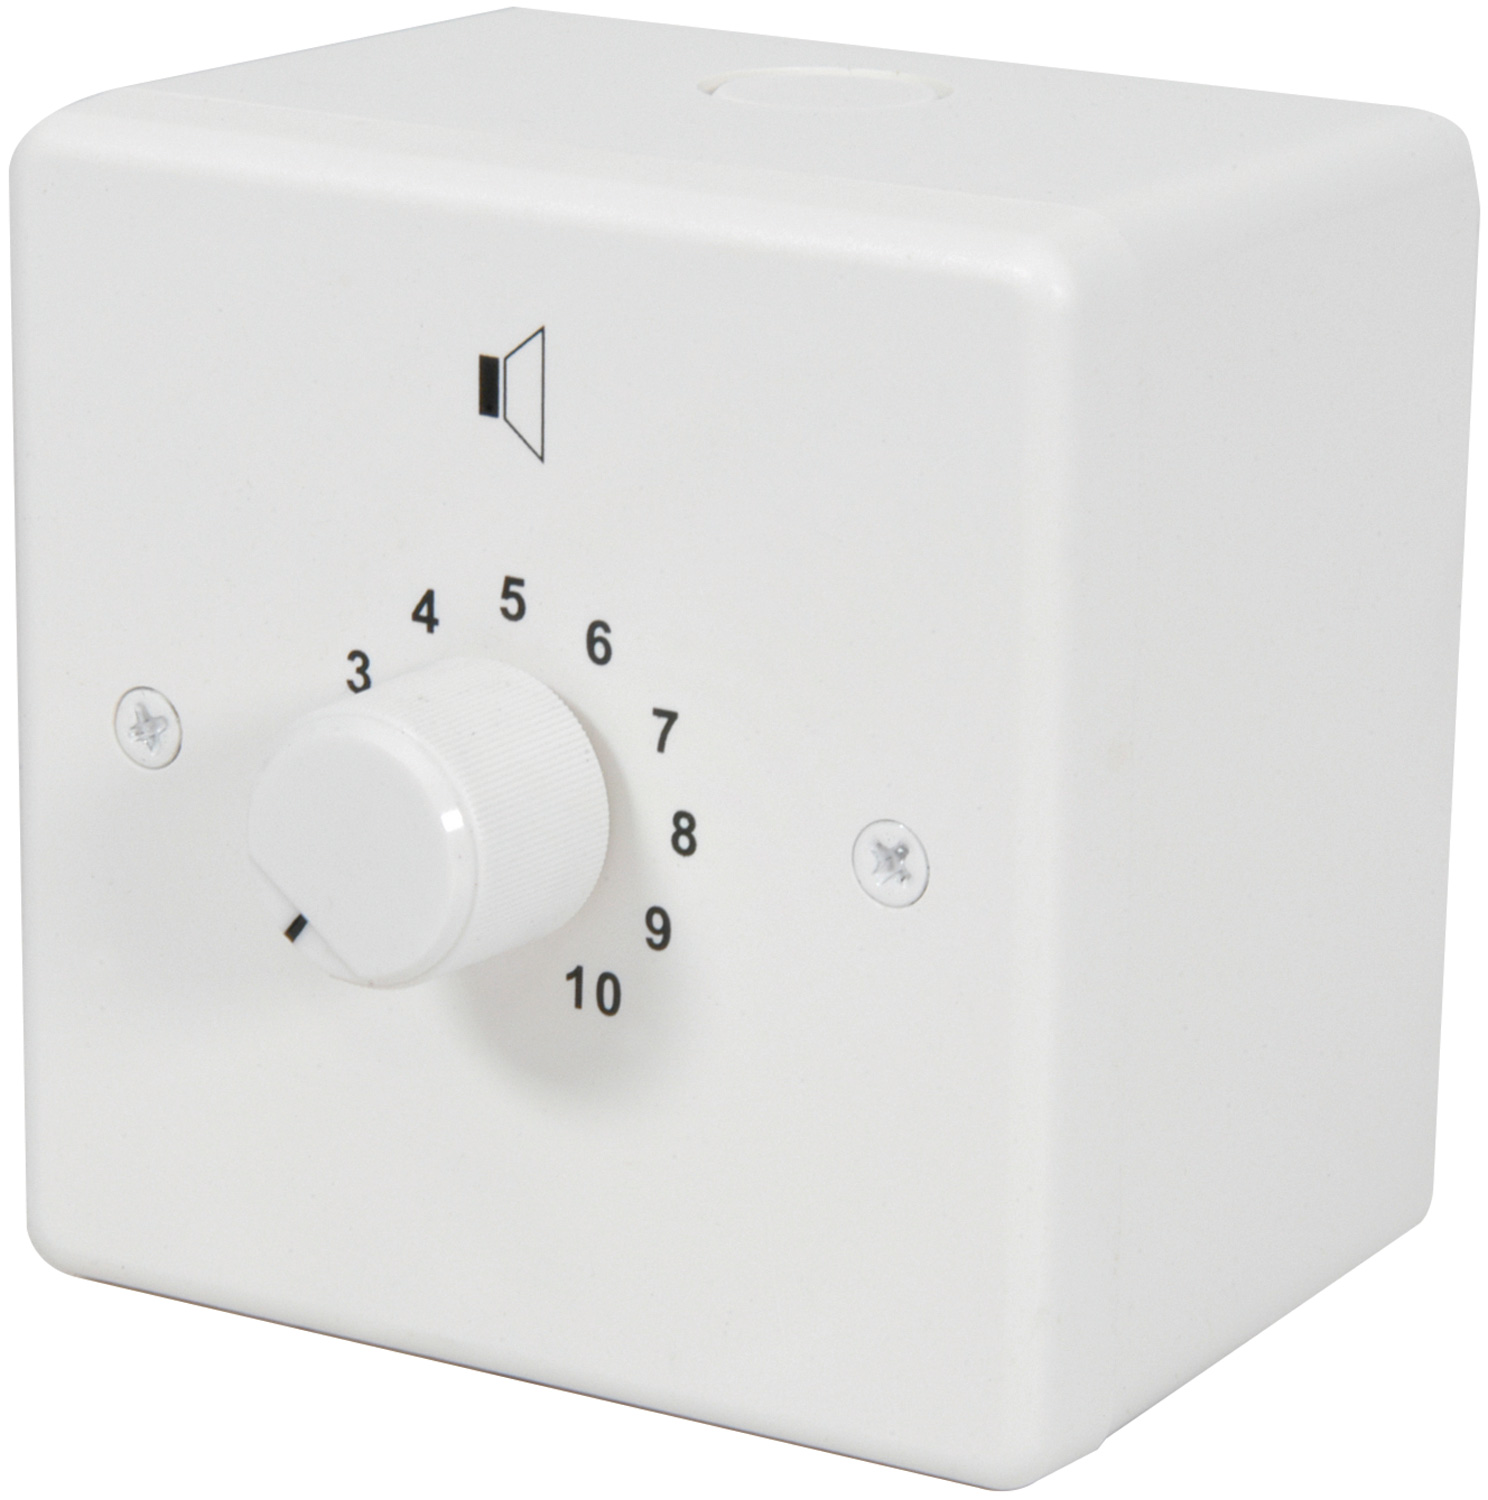 100V Volume Controls - Relay Fitted 100V volume control, relay fitted, 36W